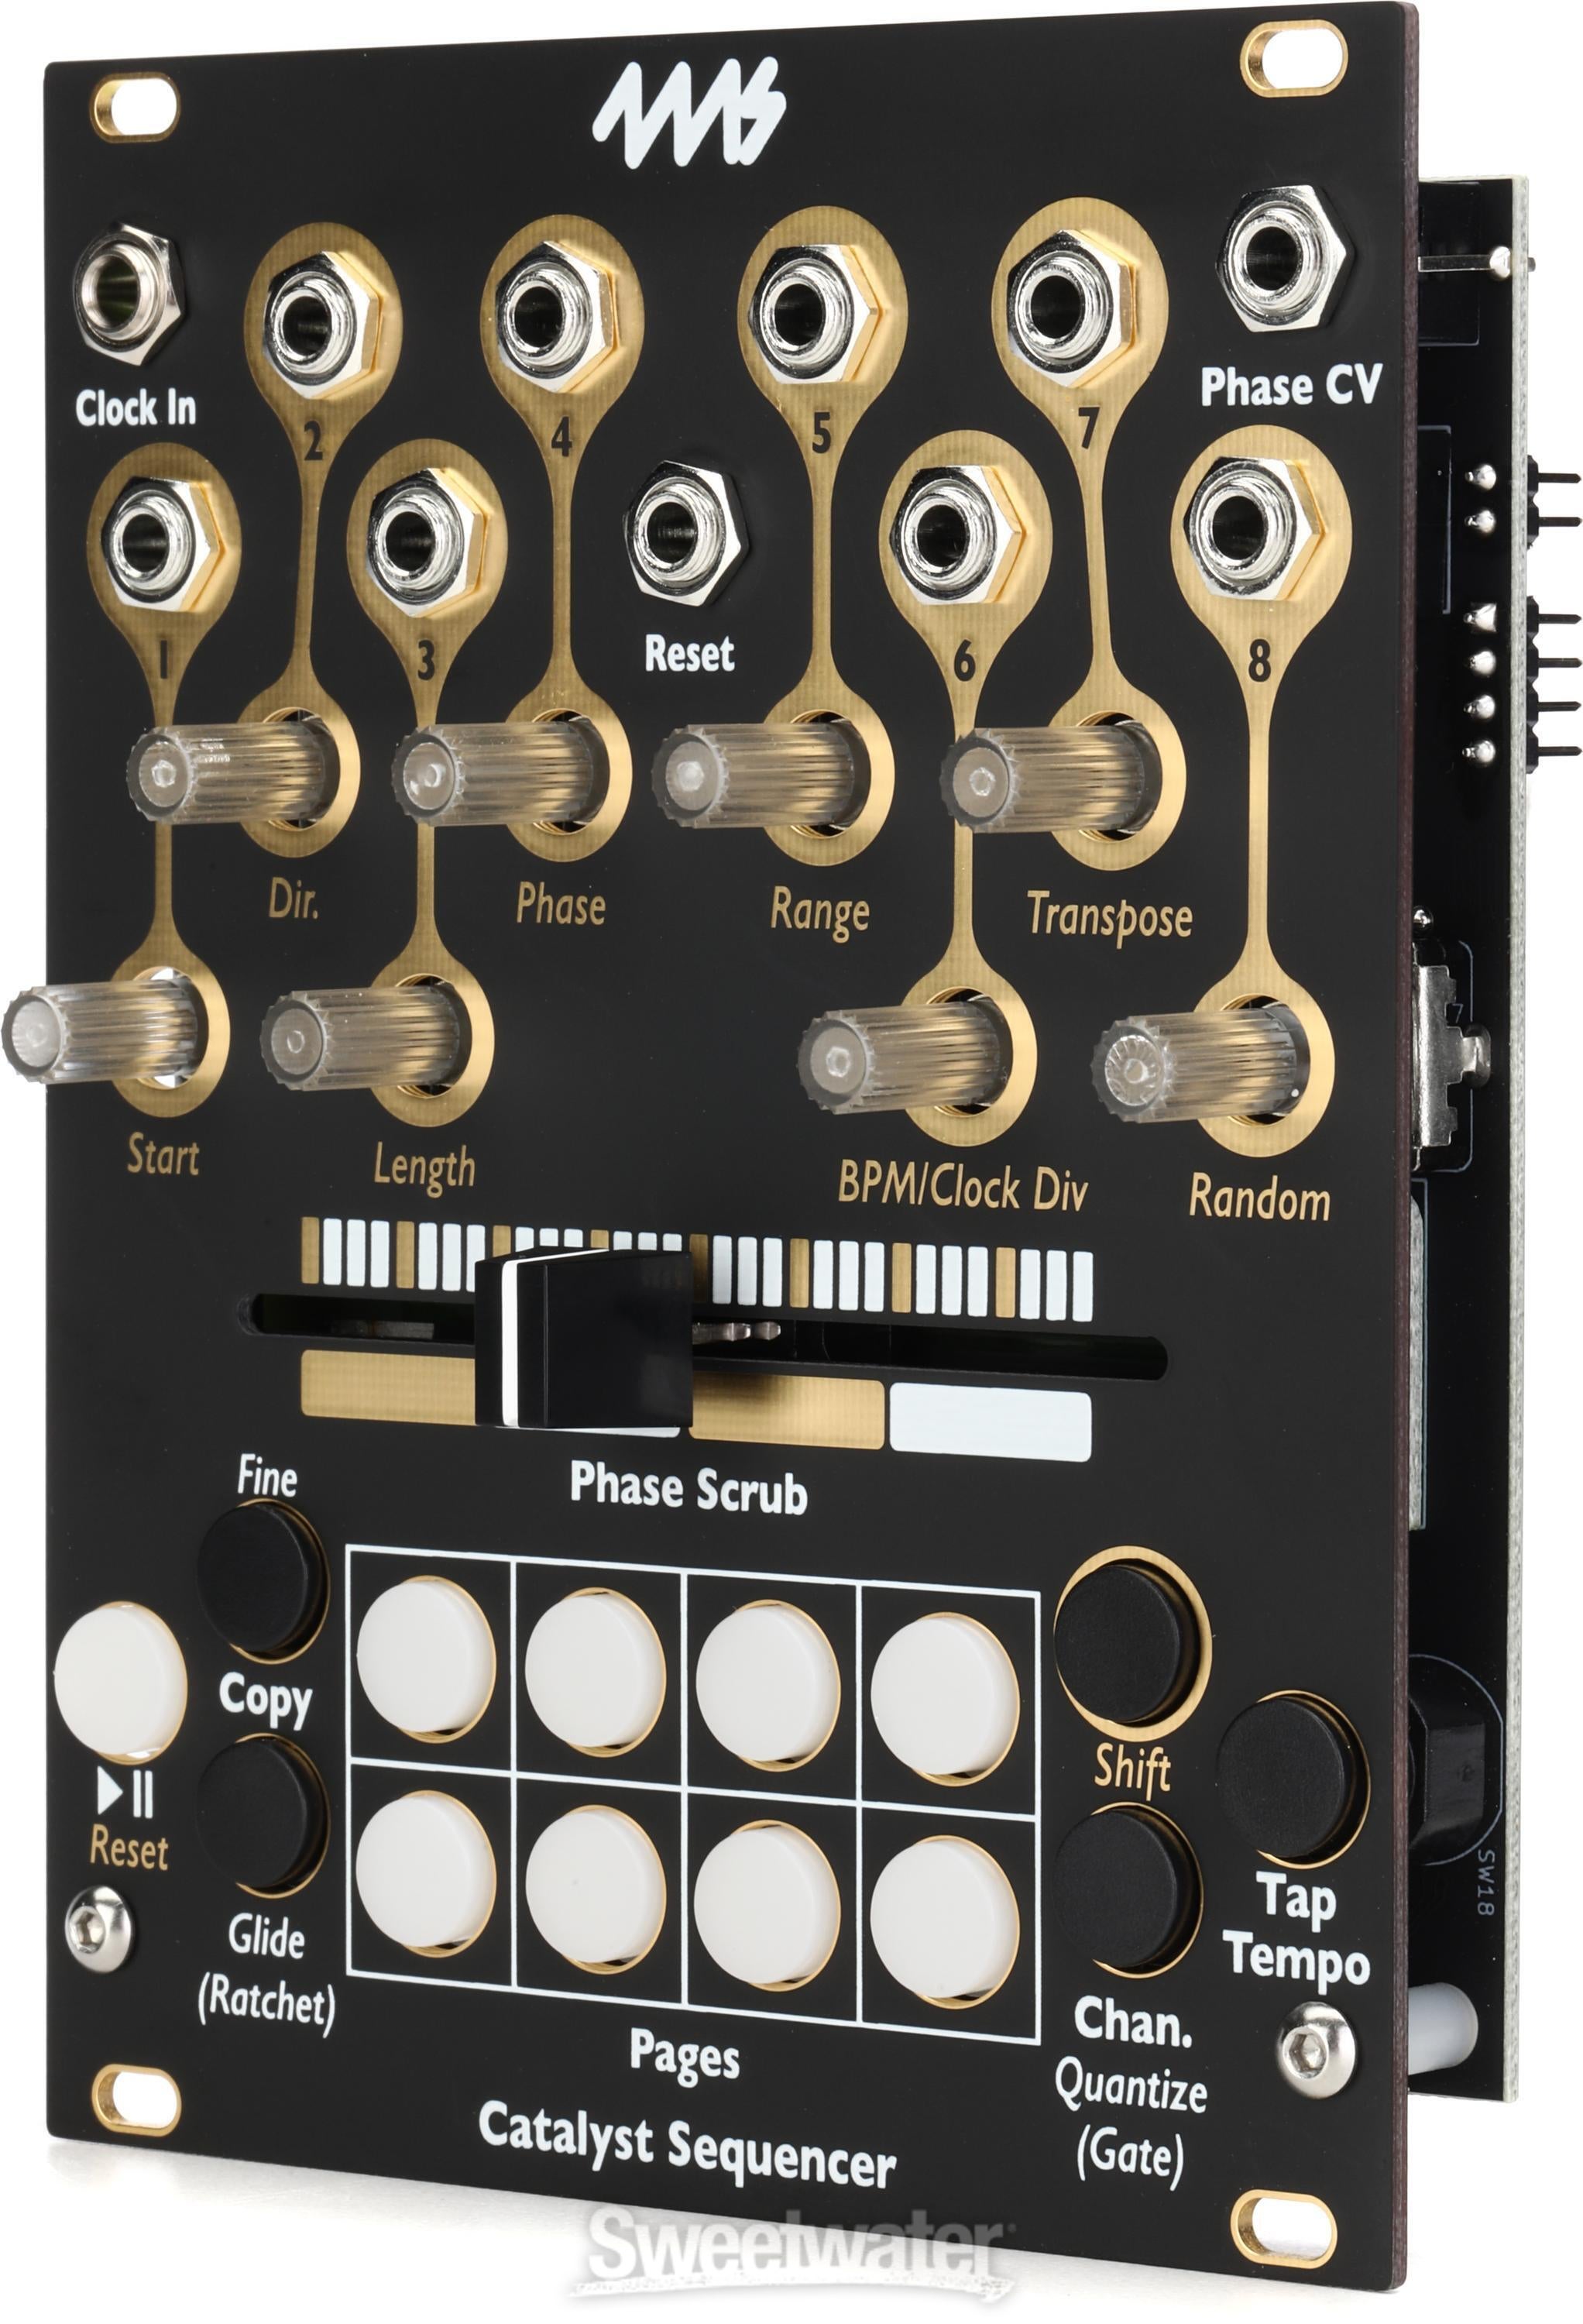 Catalyst Sequencer Eurorack Module - Sweetwater